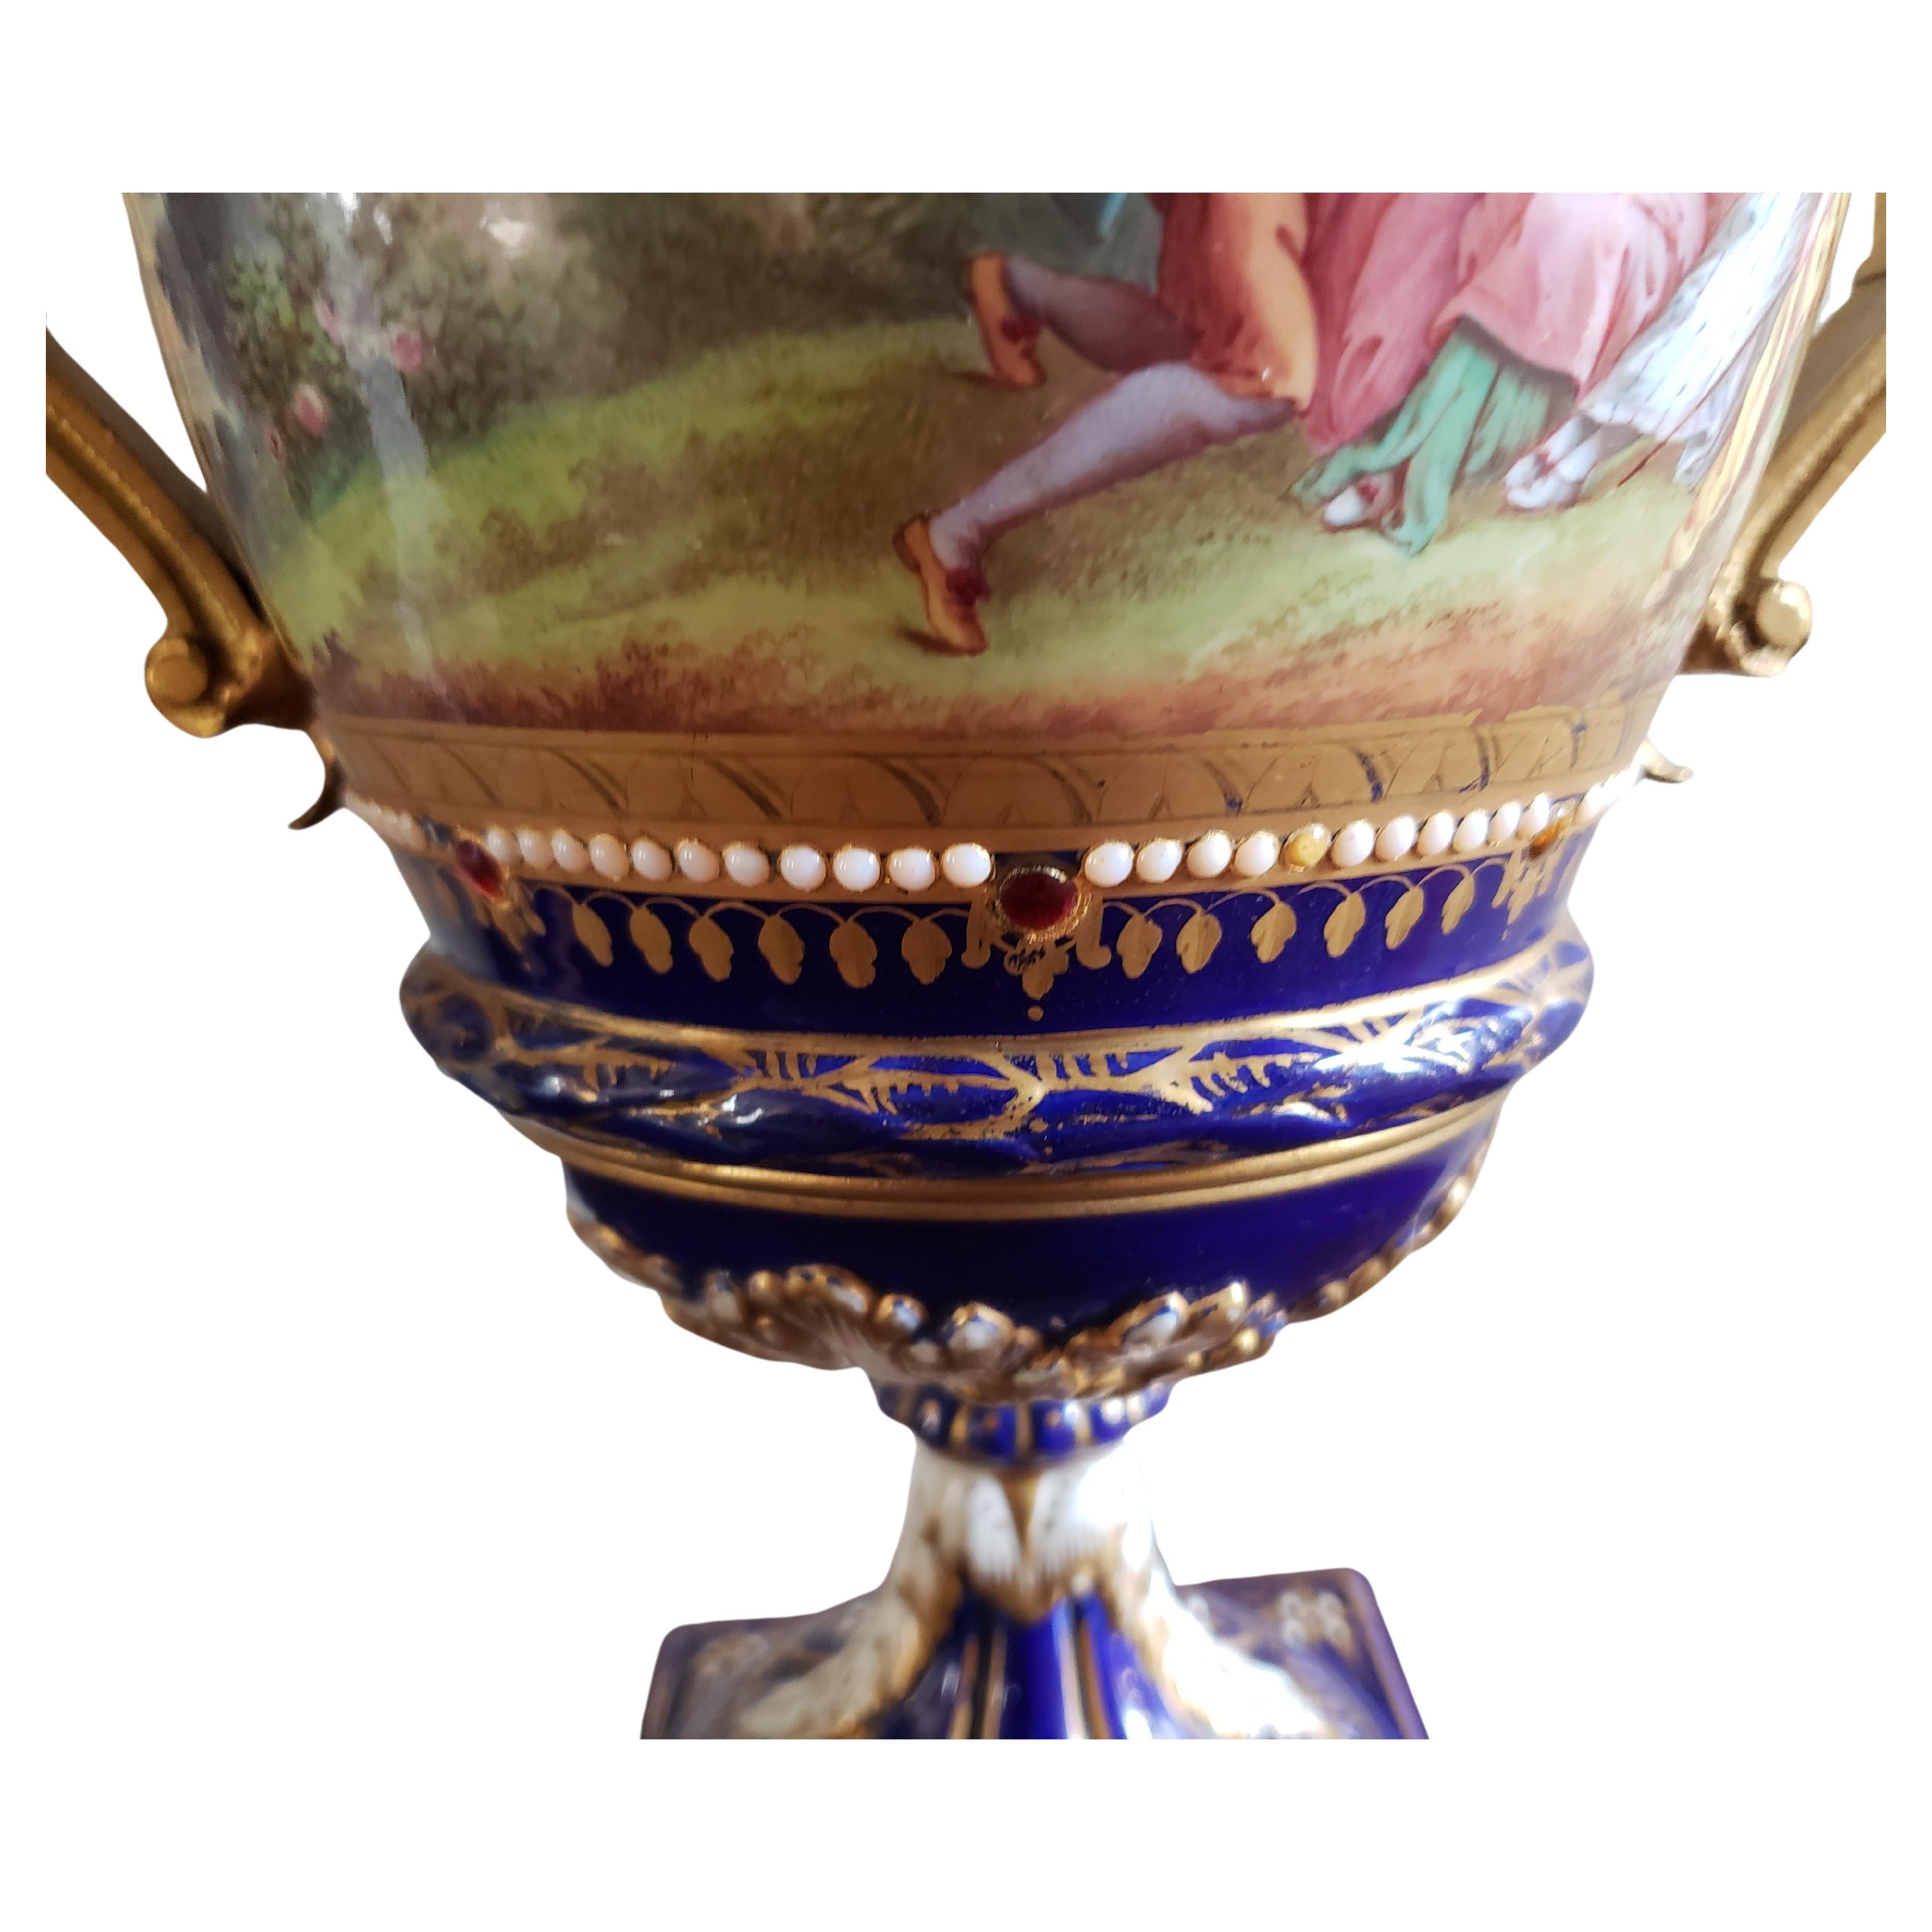 Pair Of 19th Century Sevres Porcelain Hand Painted Cobalt And Gilt Decorated Two-Handle Urns in good condition. Hand-painted different scenes on each side. No cracks or repairs. Just some normal wear commensurate with age and use.